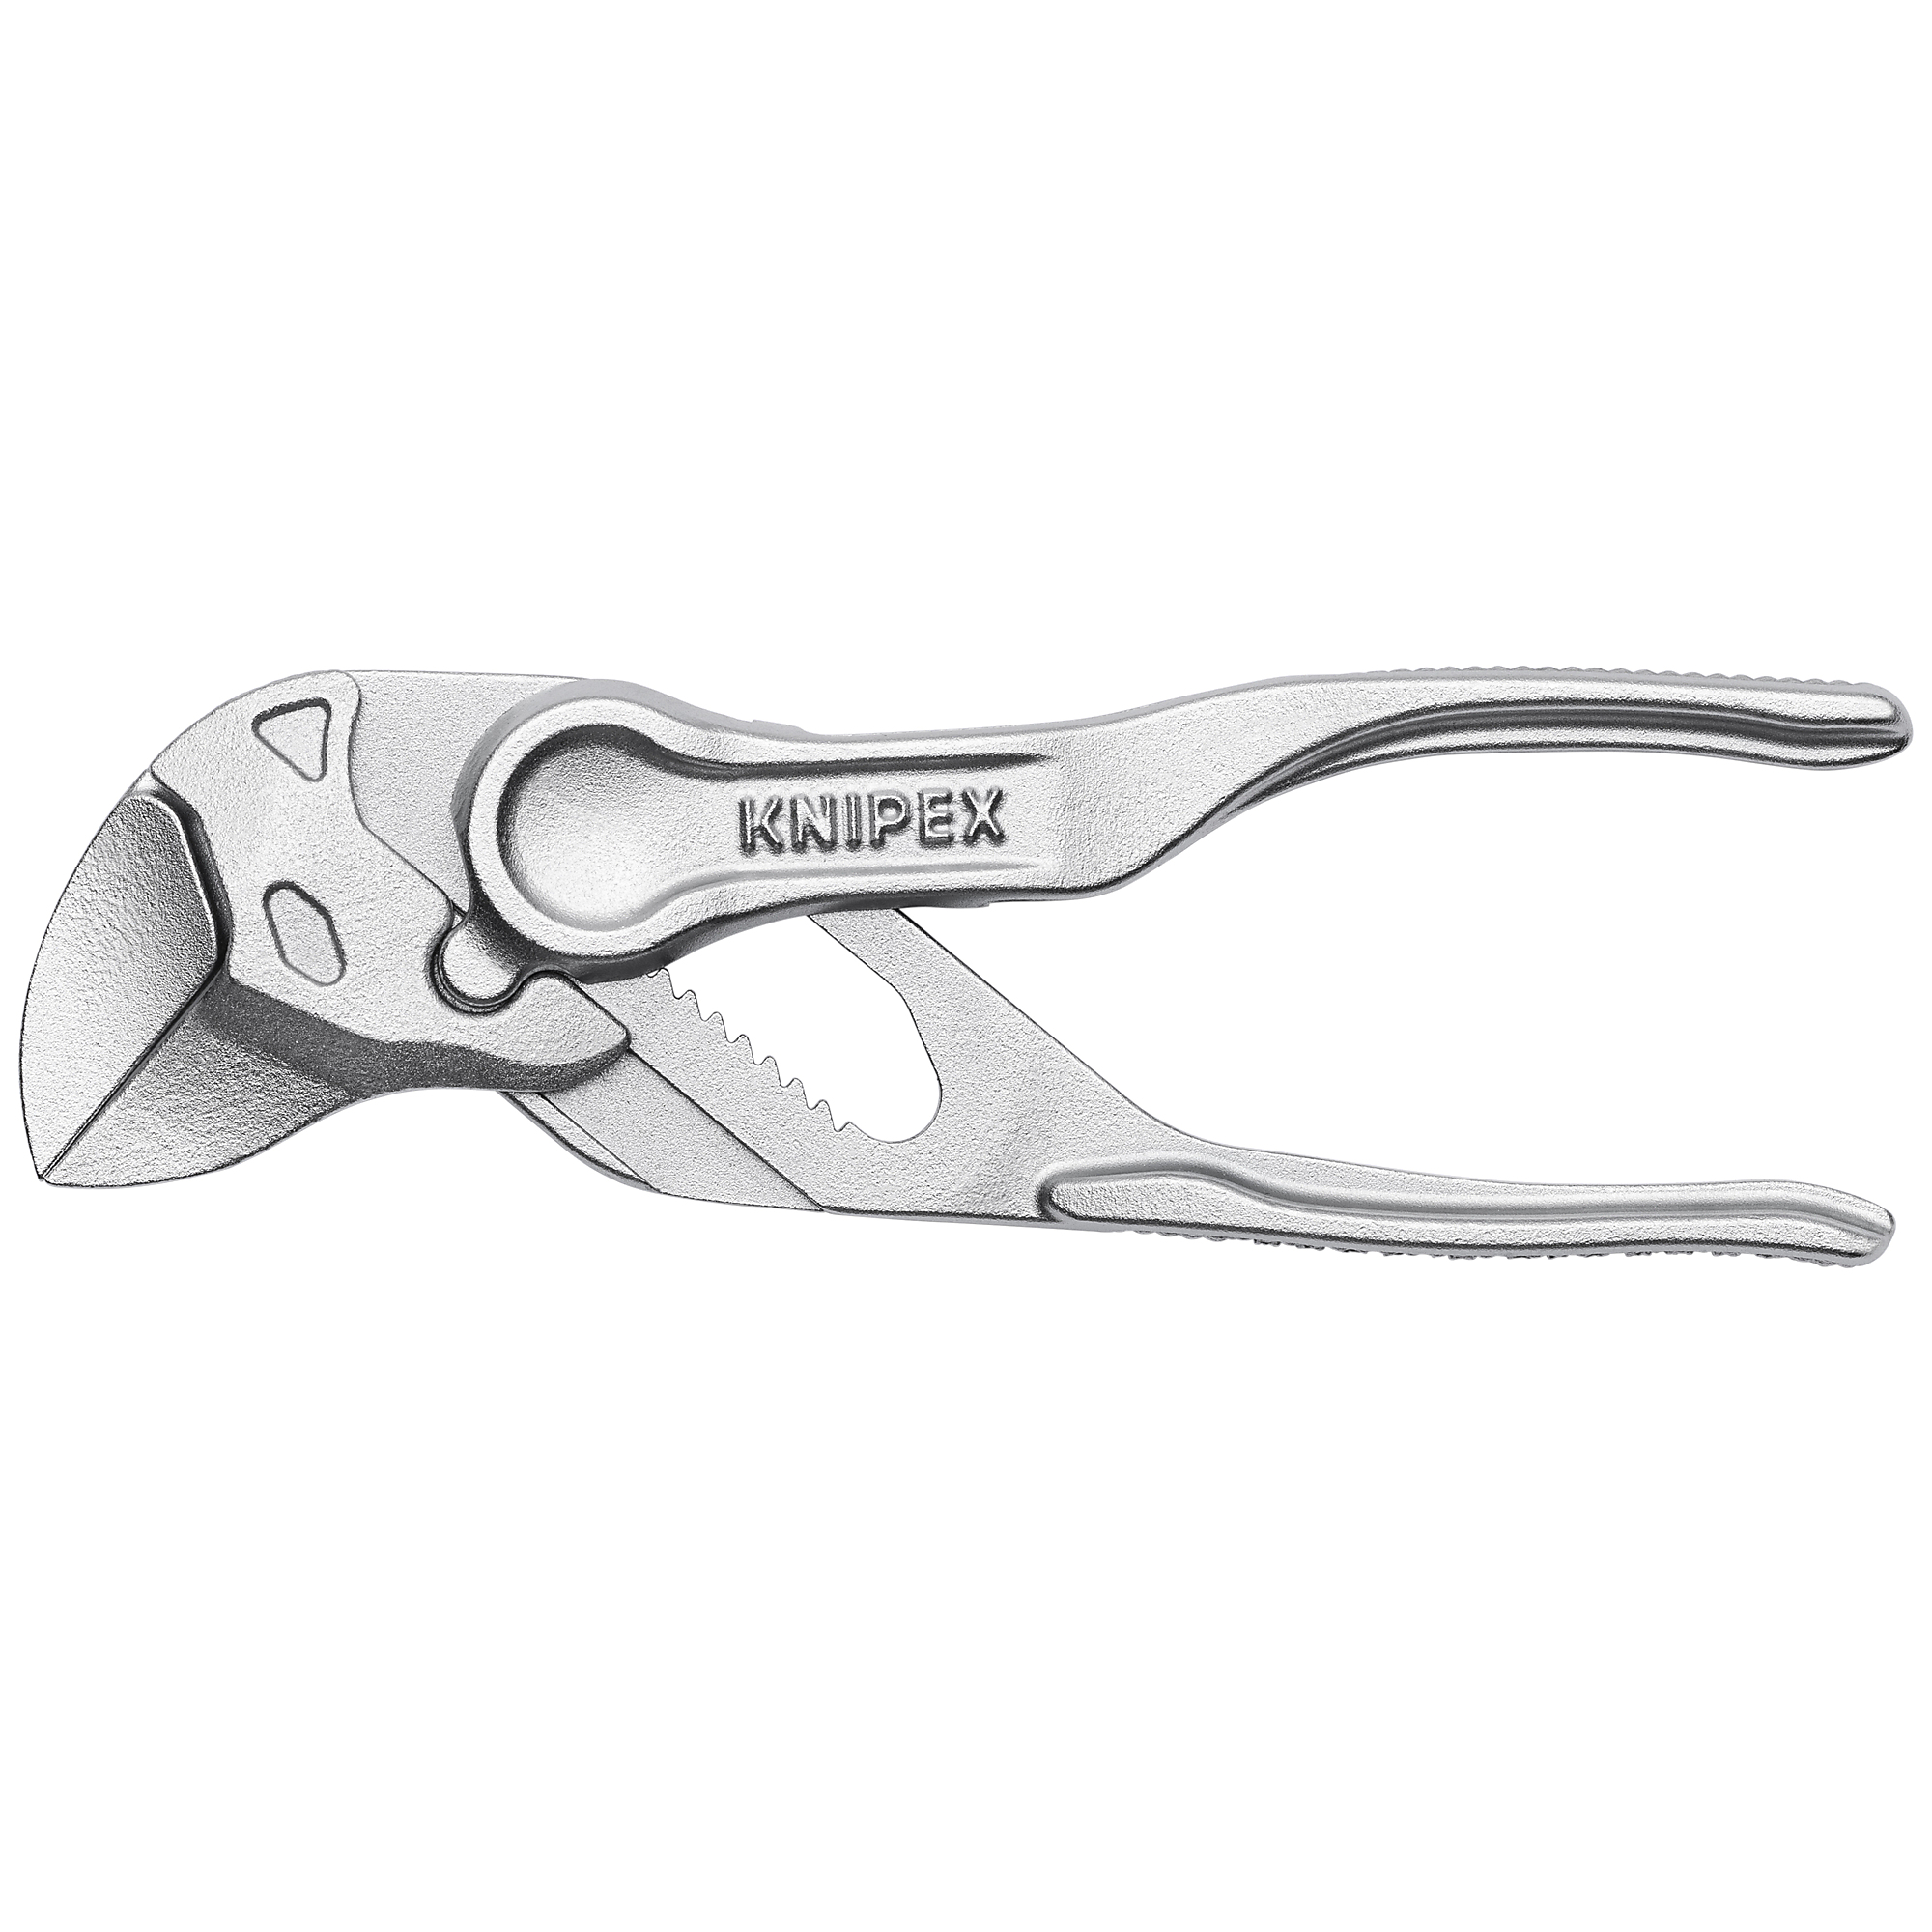 KNIPEX, Pliers Wrench XS, Embossed, Bulk, 4Inch, Pieces (qty.) 1 Jaw Capacity 0.75 in, Model 86 04 100